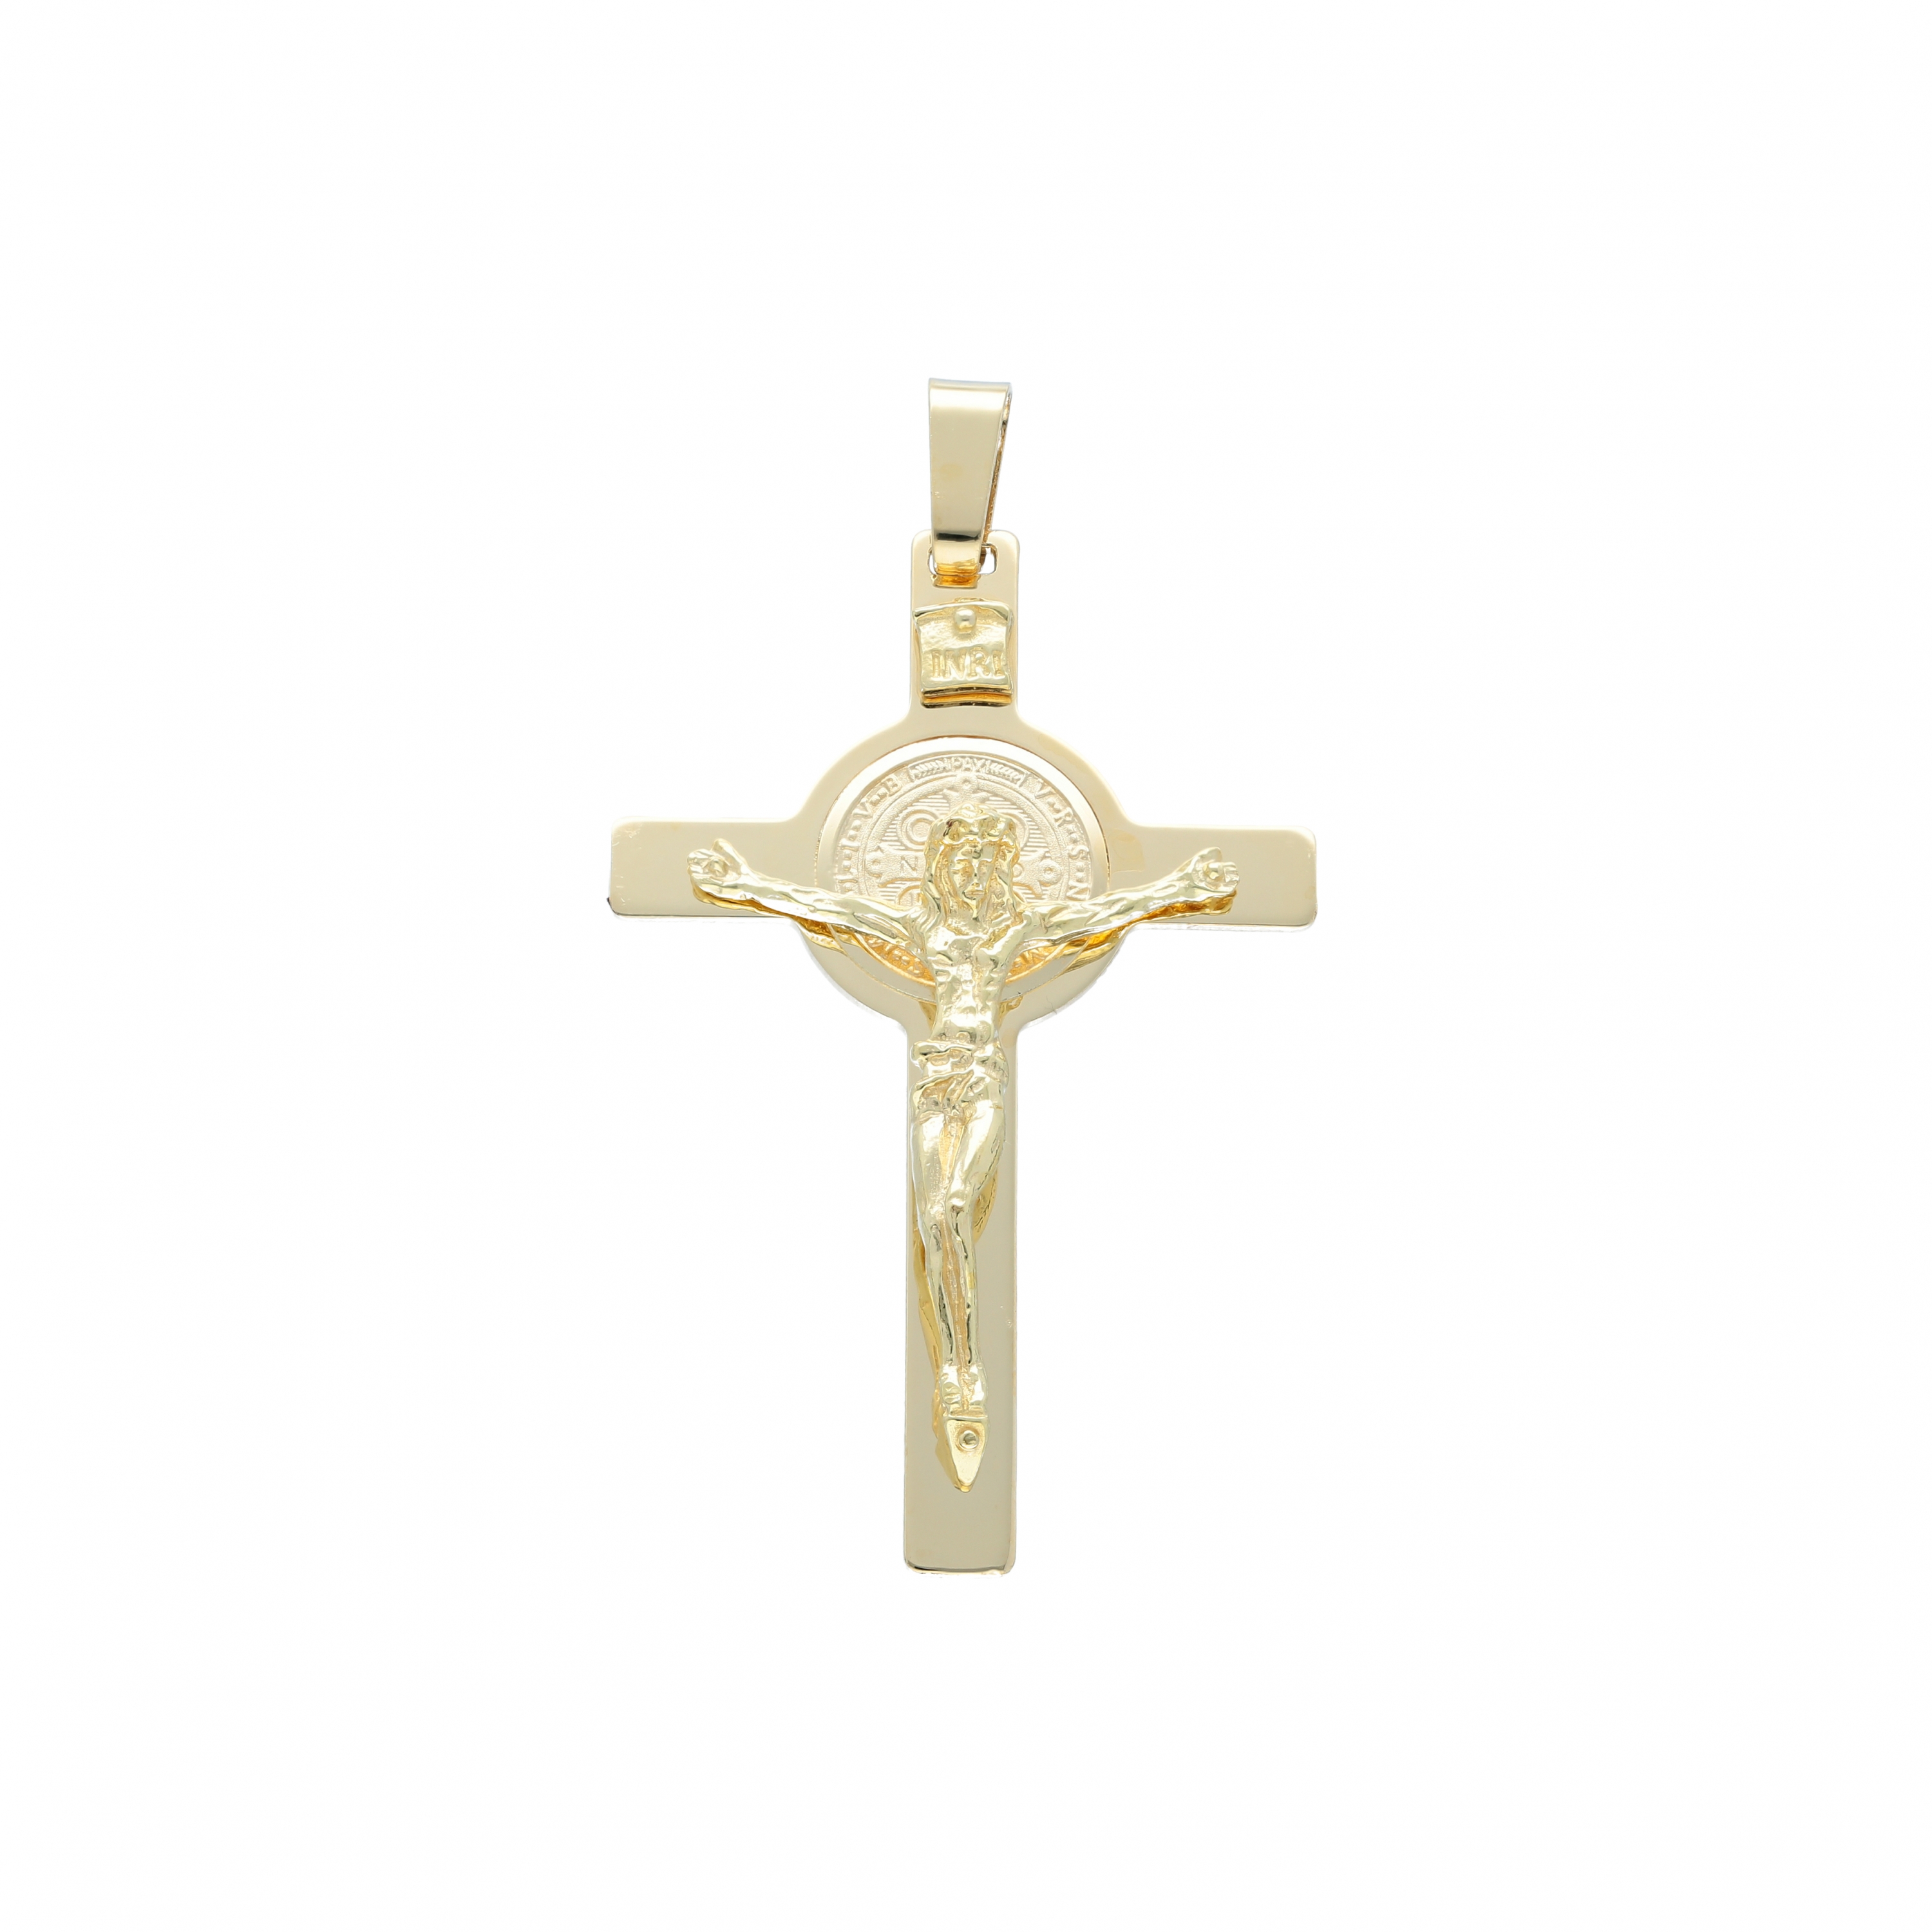 Cross pendant in 18 kt yellow gold made in italy